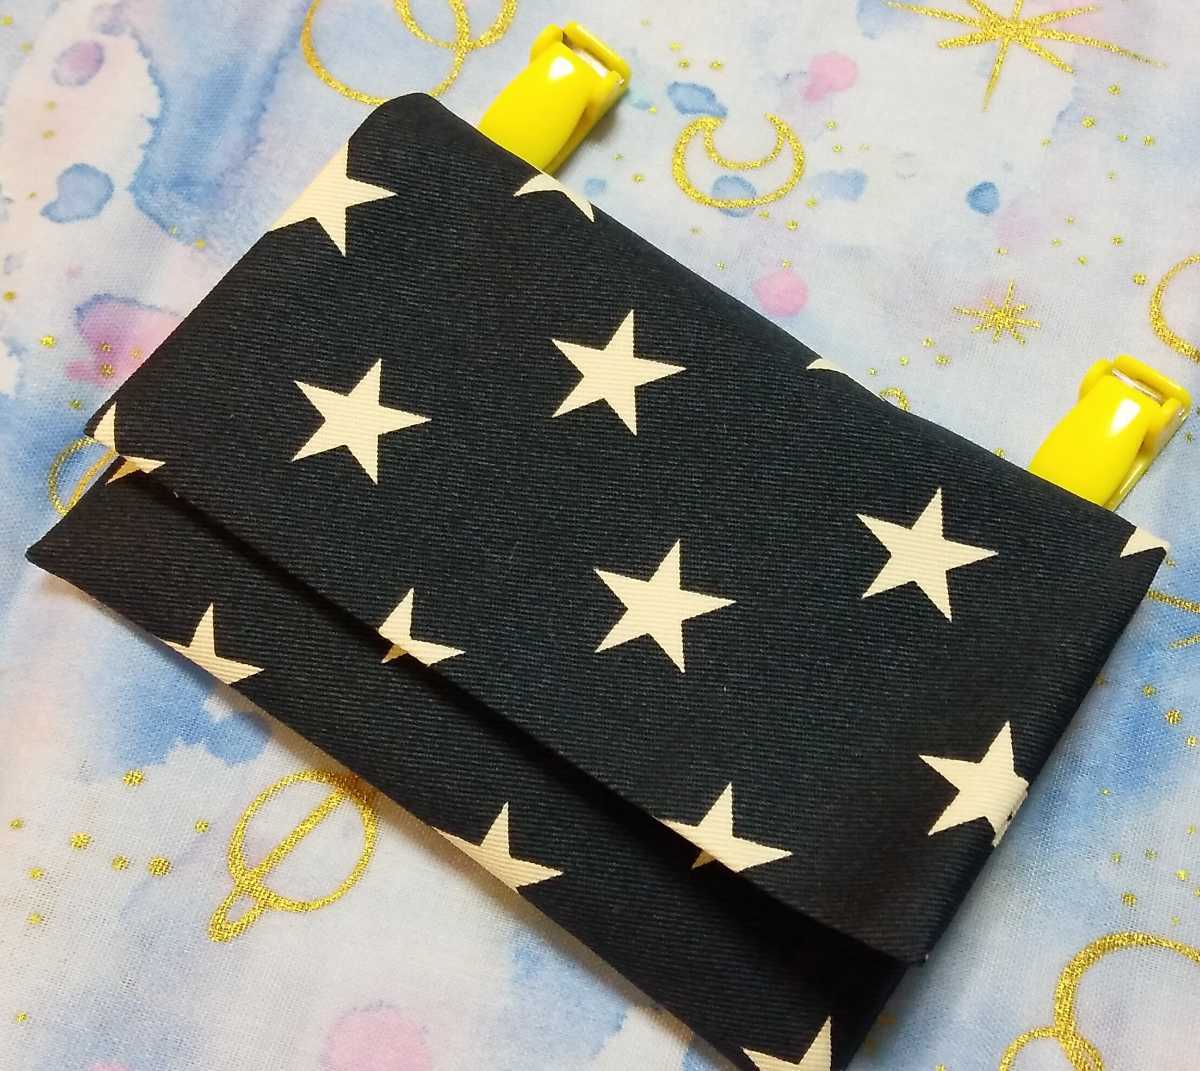  postage included hand made movement pocket man simple star pattern navy blue 